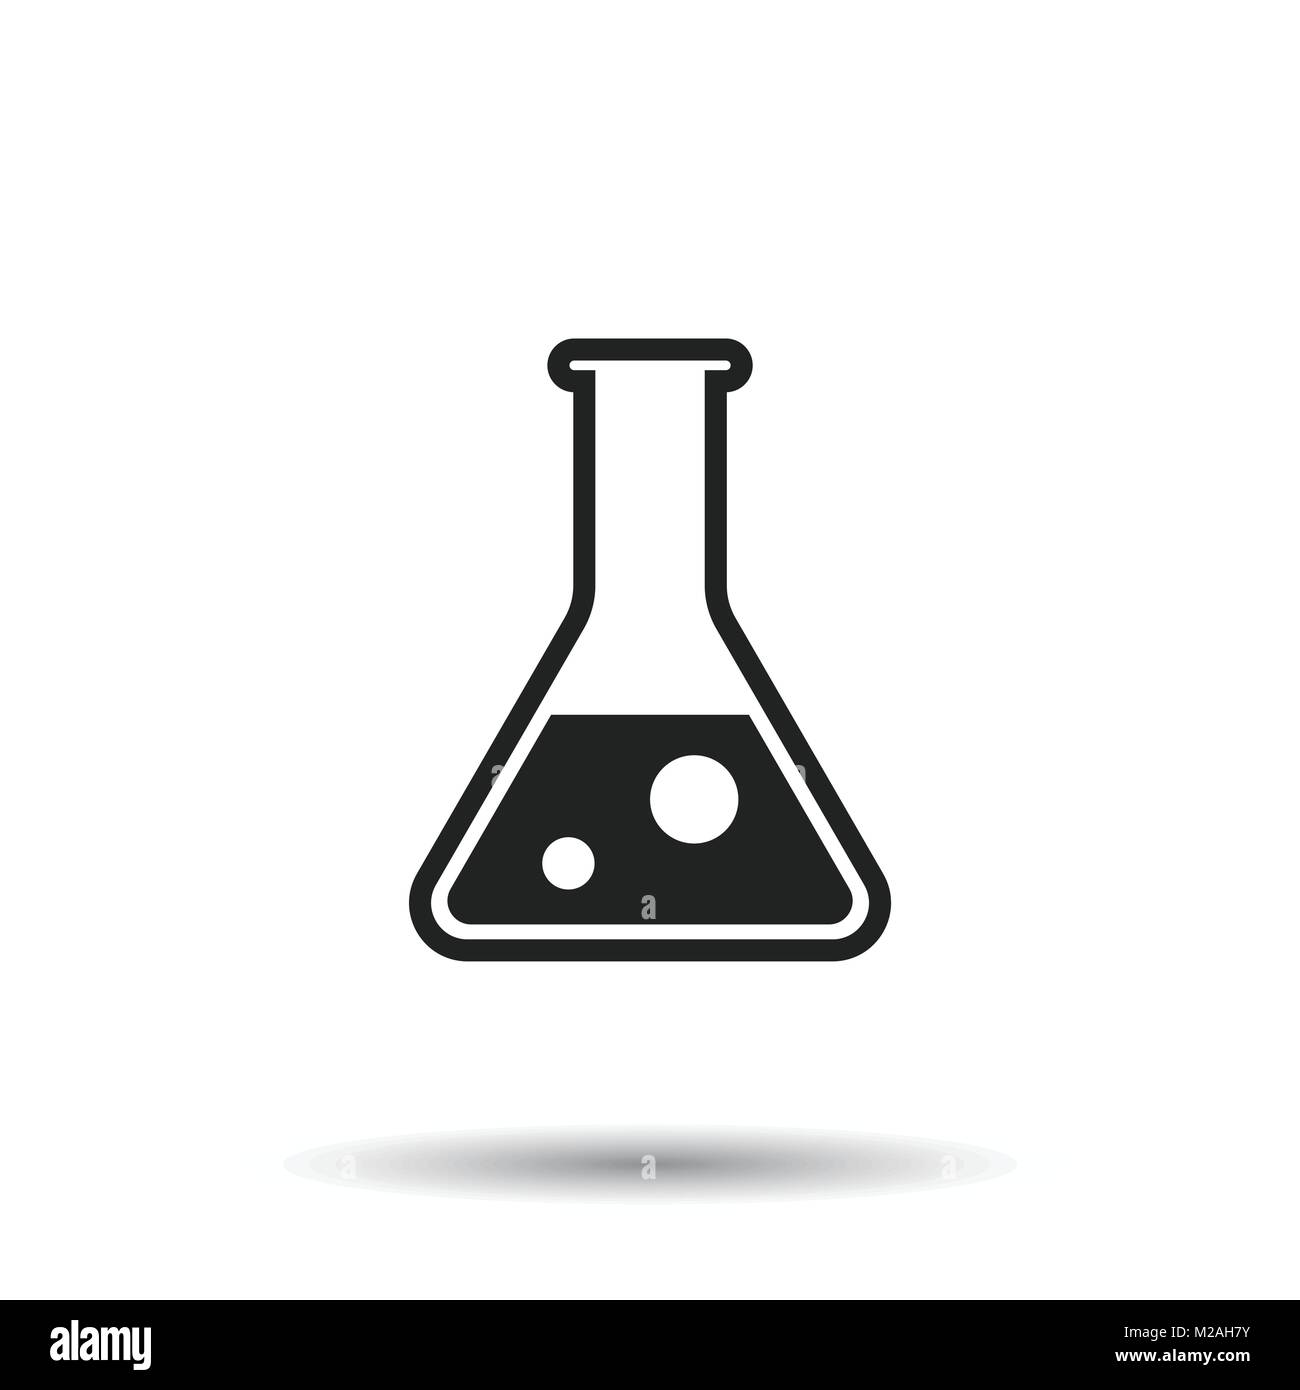 Balance, chemistry, equipment, experiment, flask, scale, science icon -  Download on Iconfinder